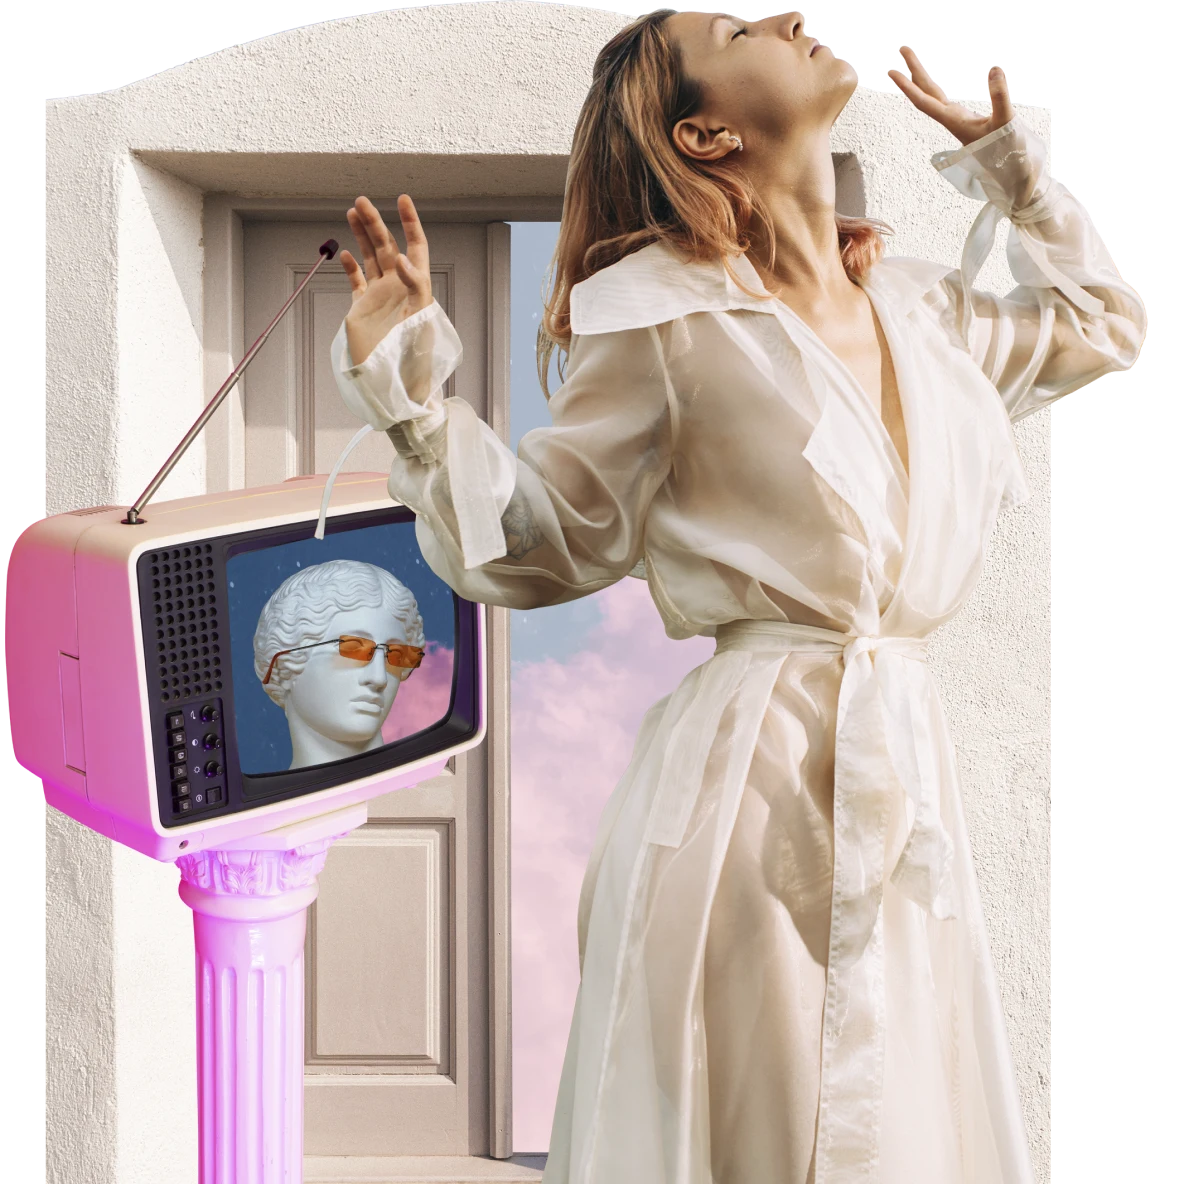 Woman in clear white raincoat throws her head and hands back. Small pink TV on a pink pedestal at left, white marble bust in the screen. Doorway arch in background.